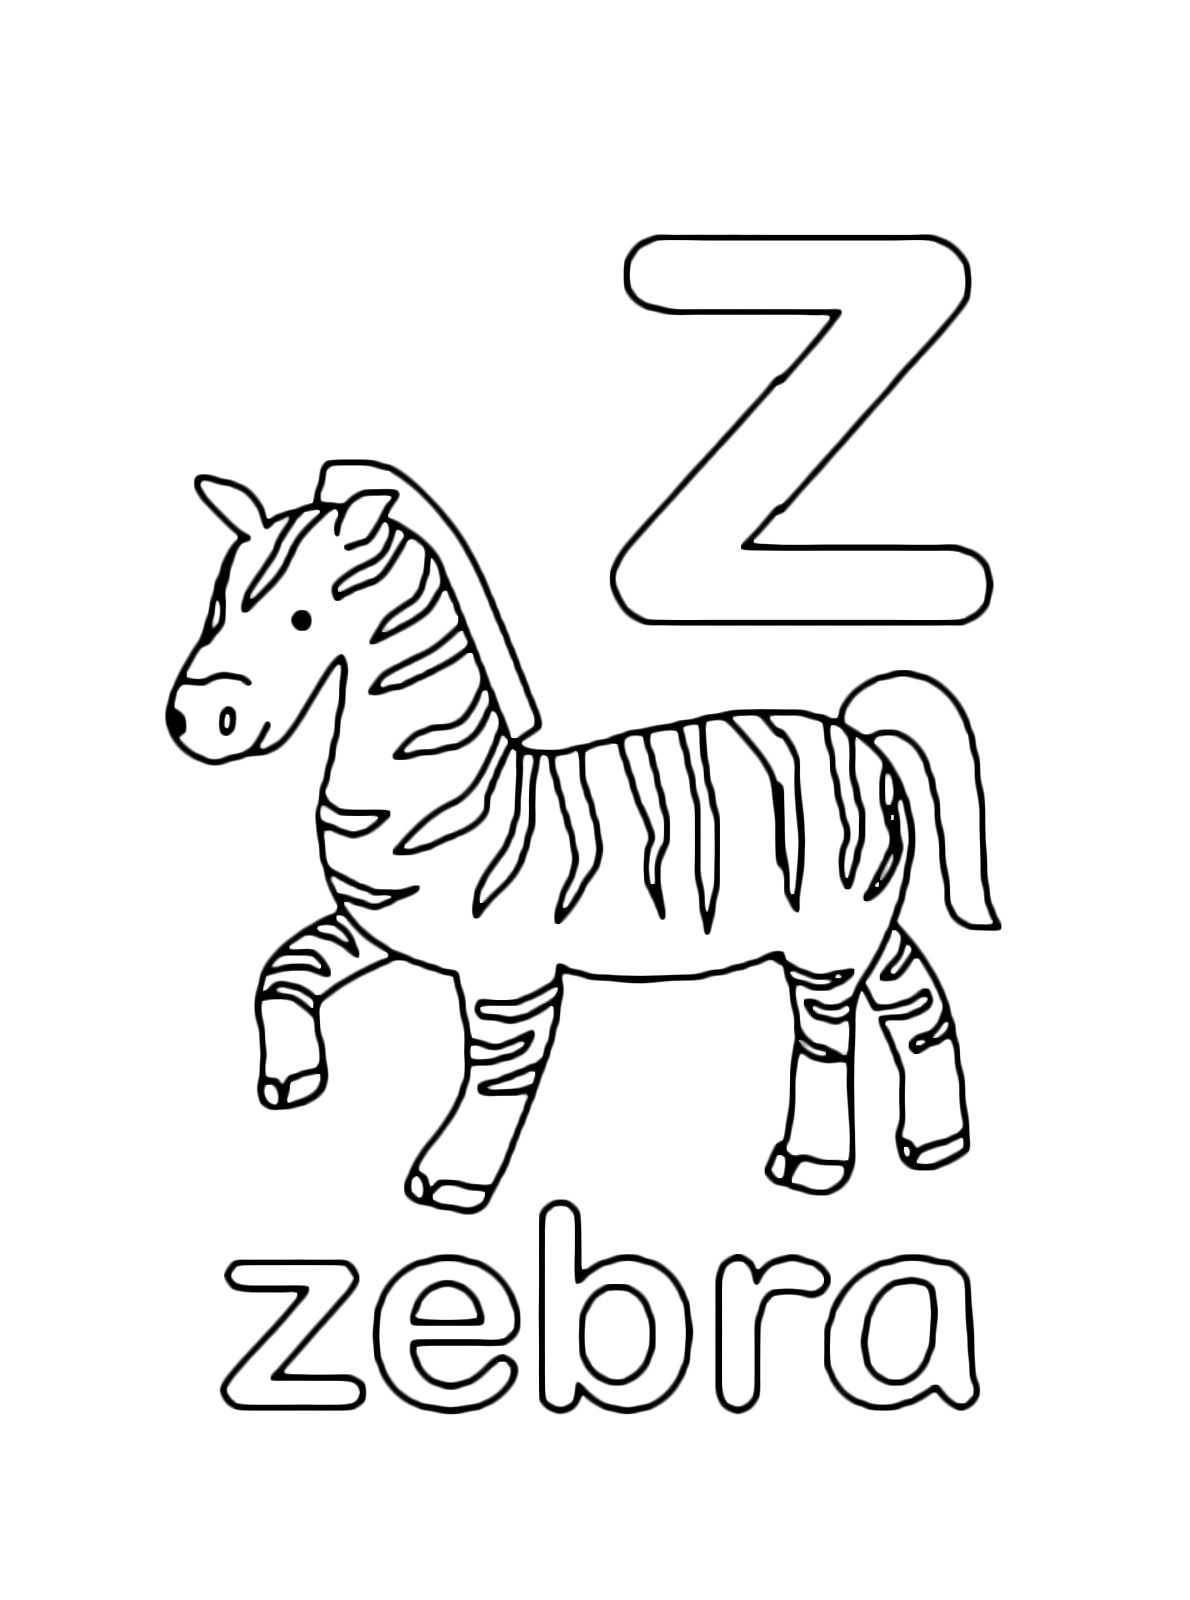 Letters and numbers - z for zebra lowercase letter